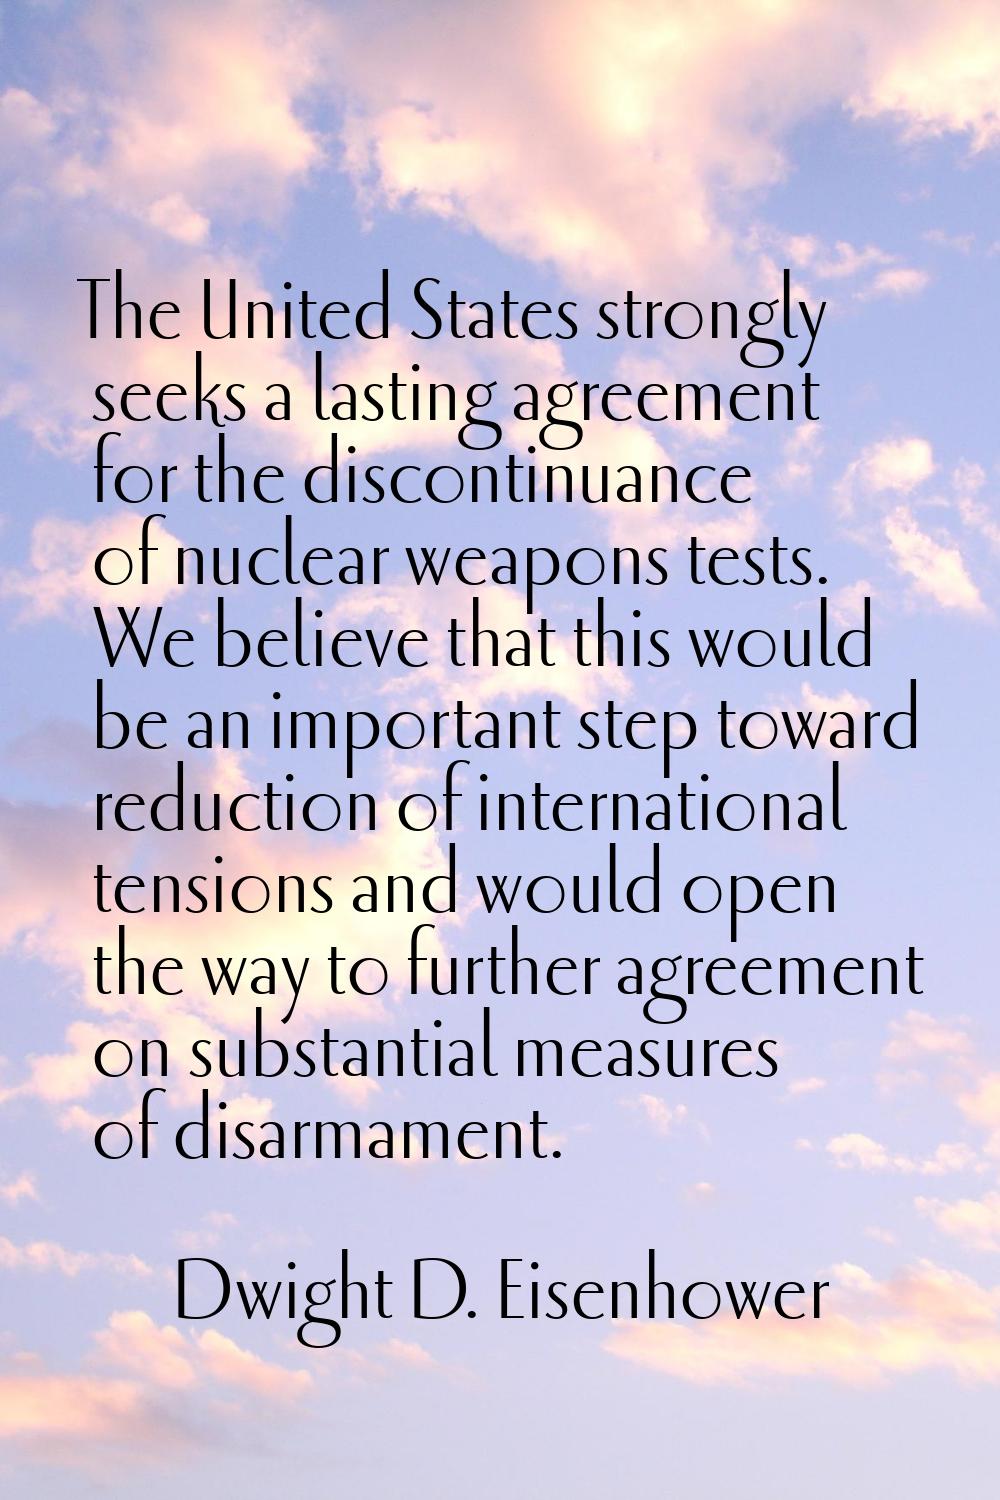 The United States strongly seeks a lasting agreement for the discontinuance of nuclear weapons test